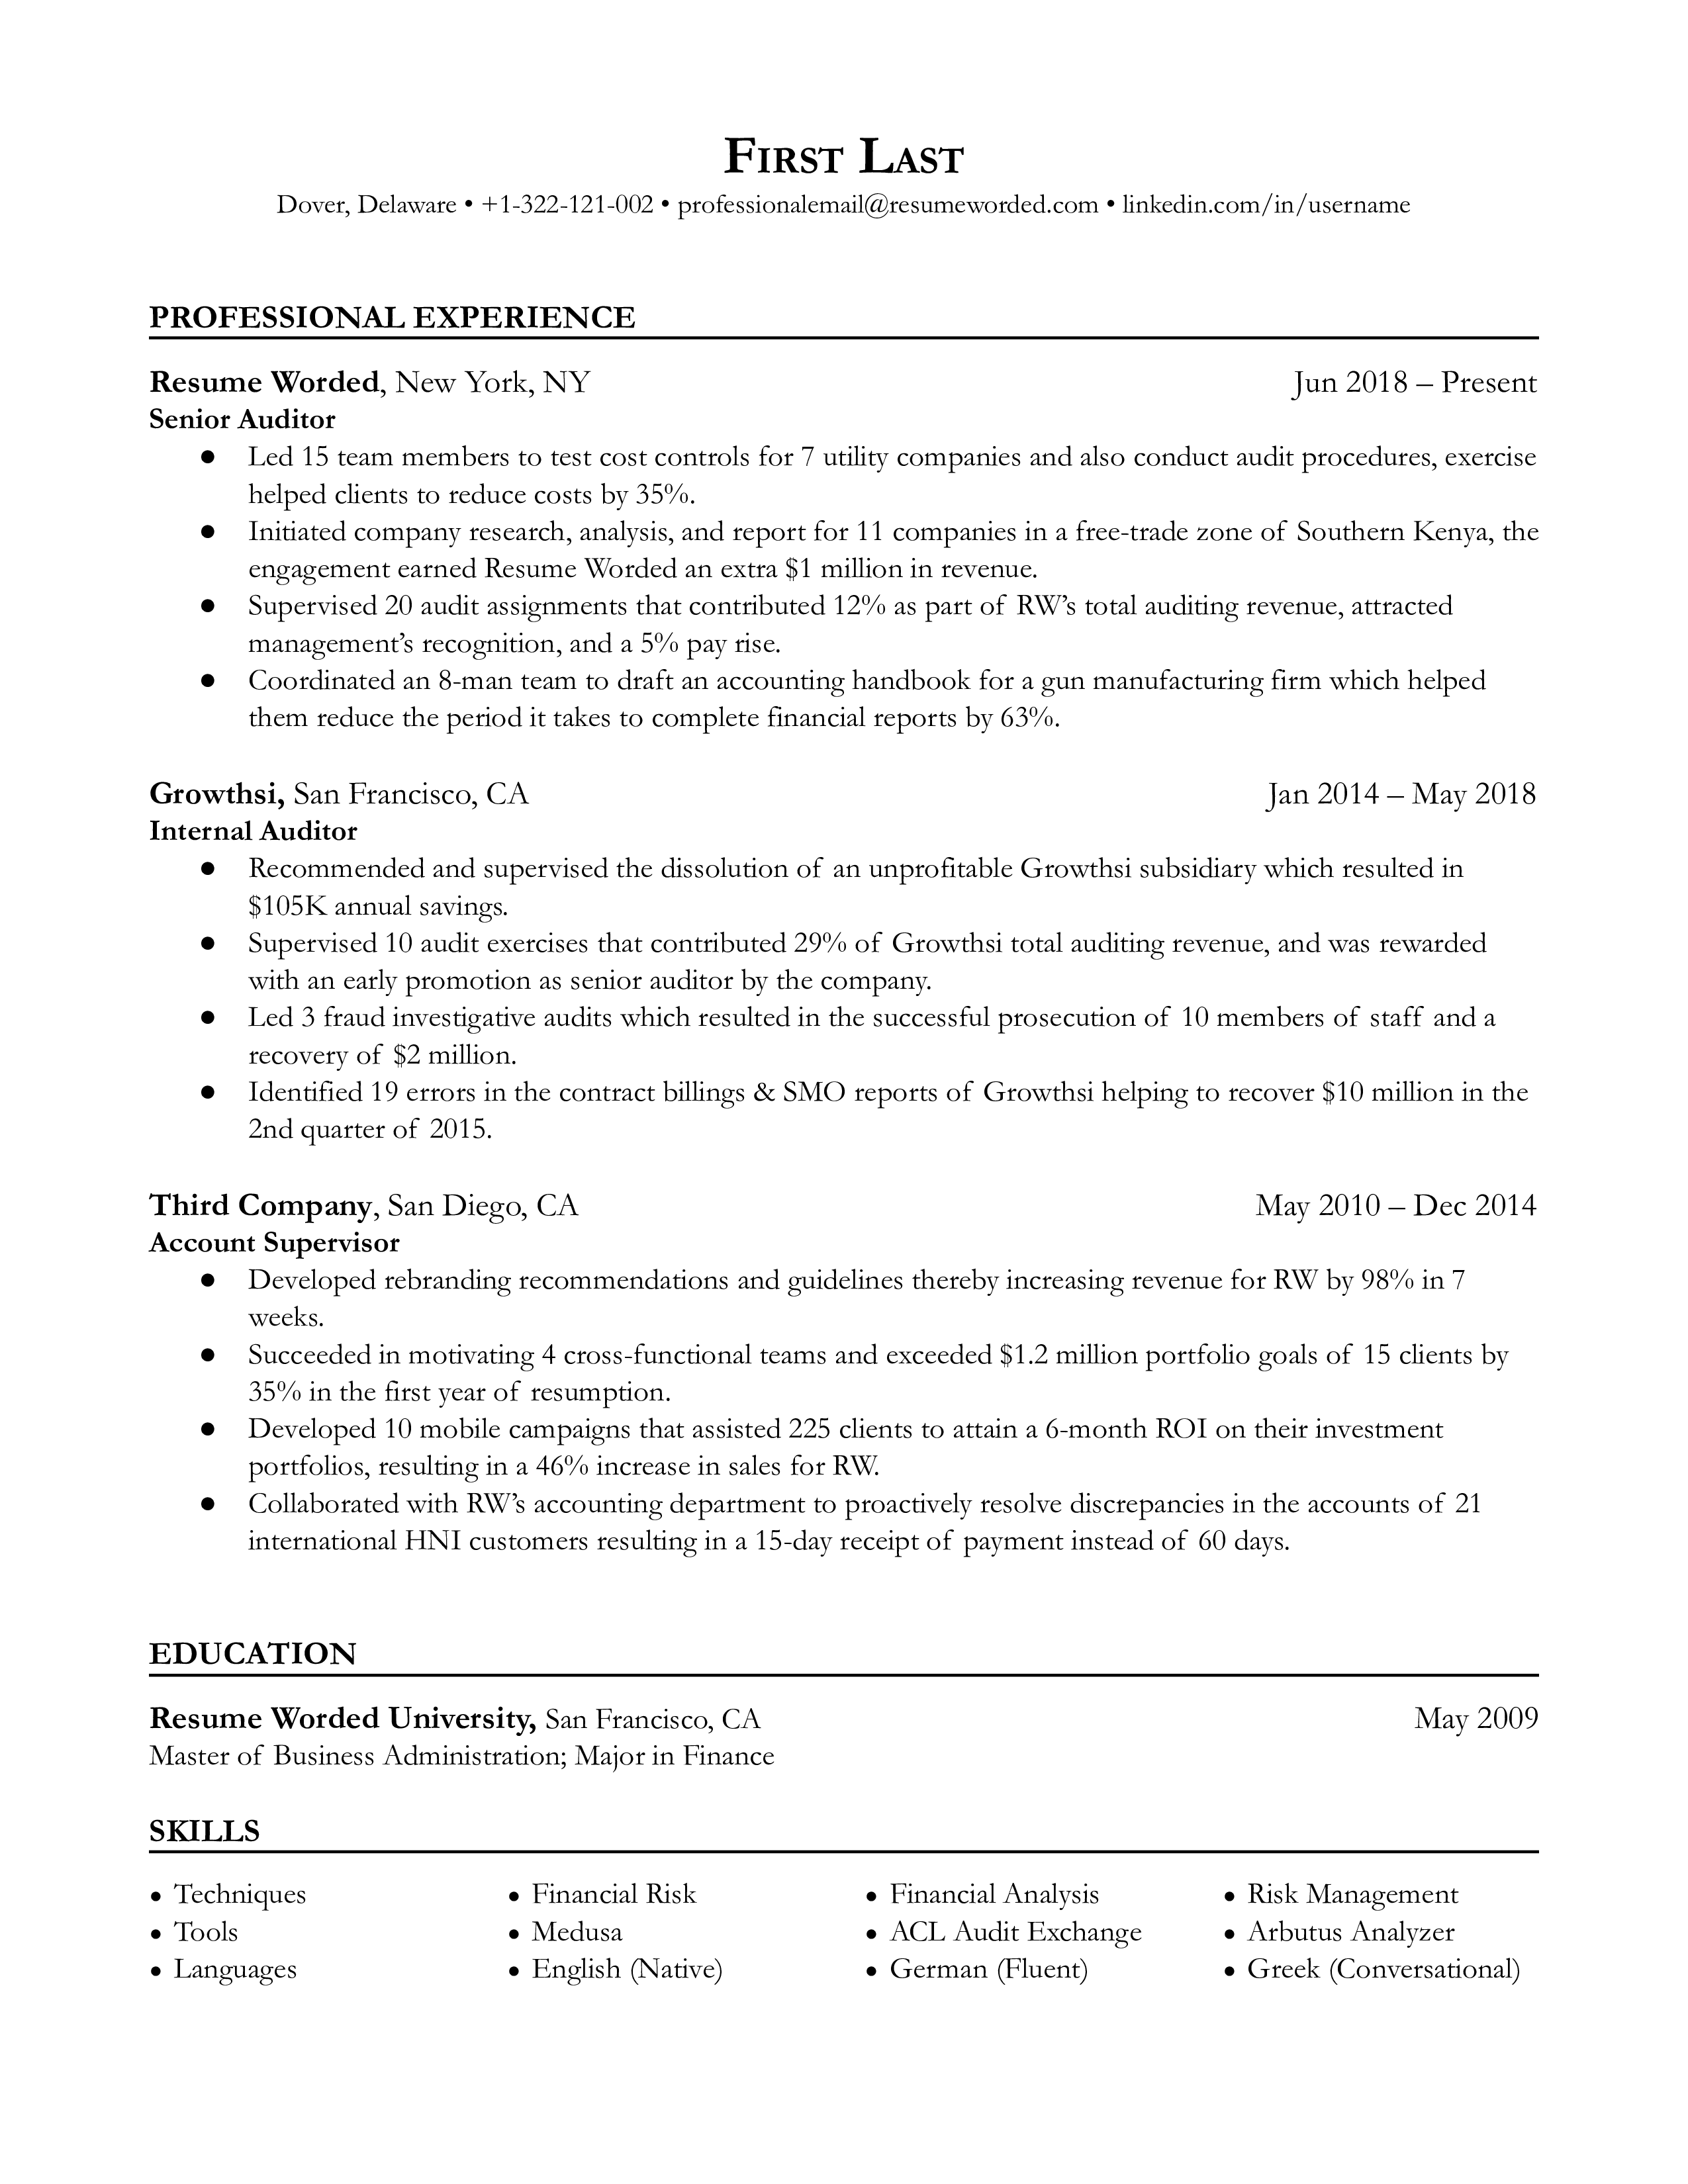 A senior auditor resume sample that highlights applicant's managerial and auditor experience.